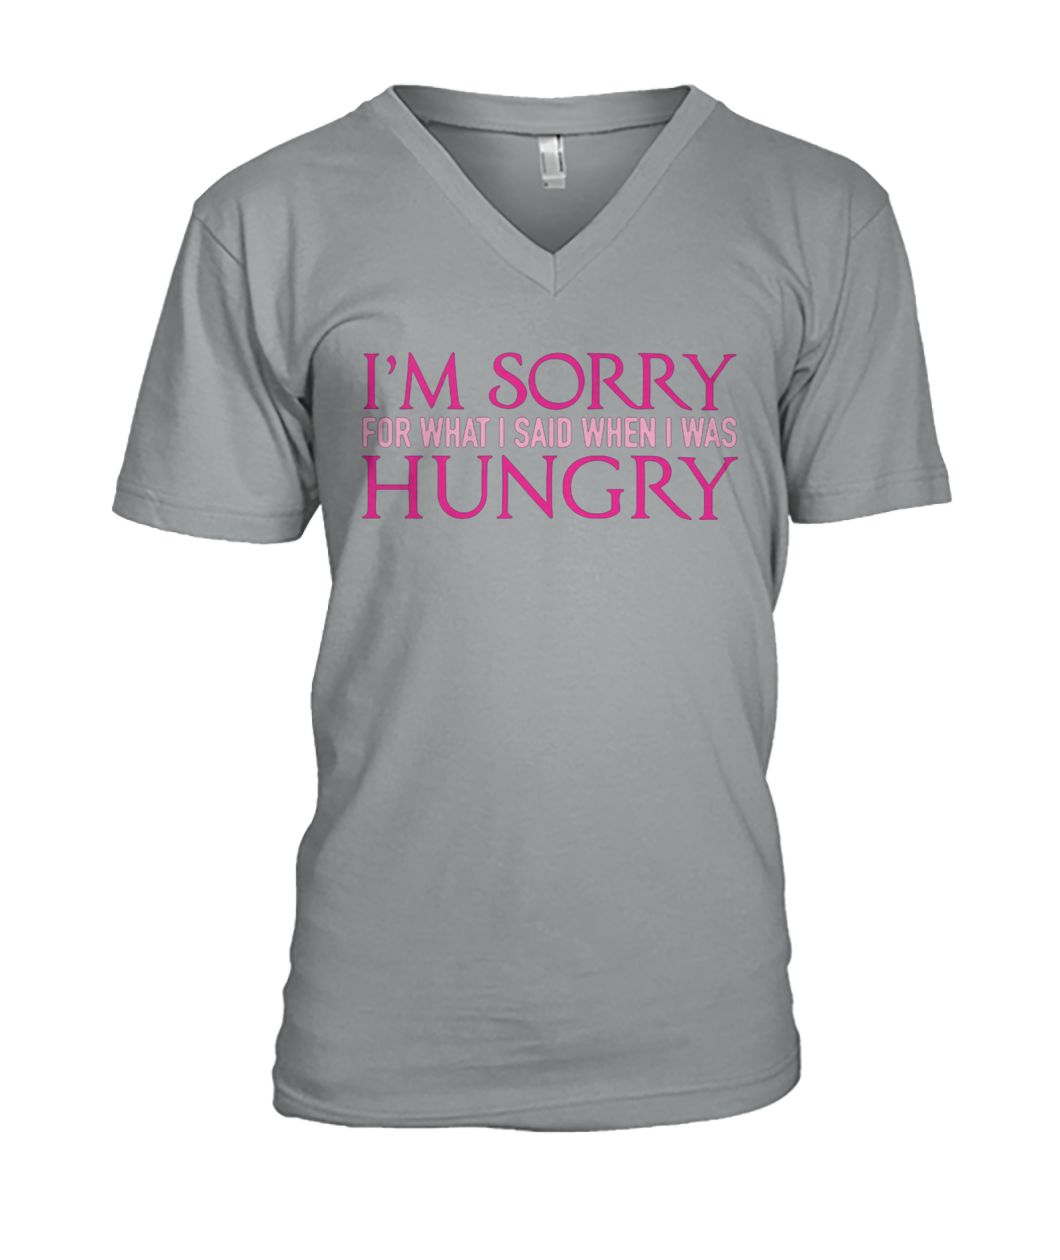 I'm sorry for what I said when I was hungry mens v-neck